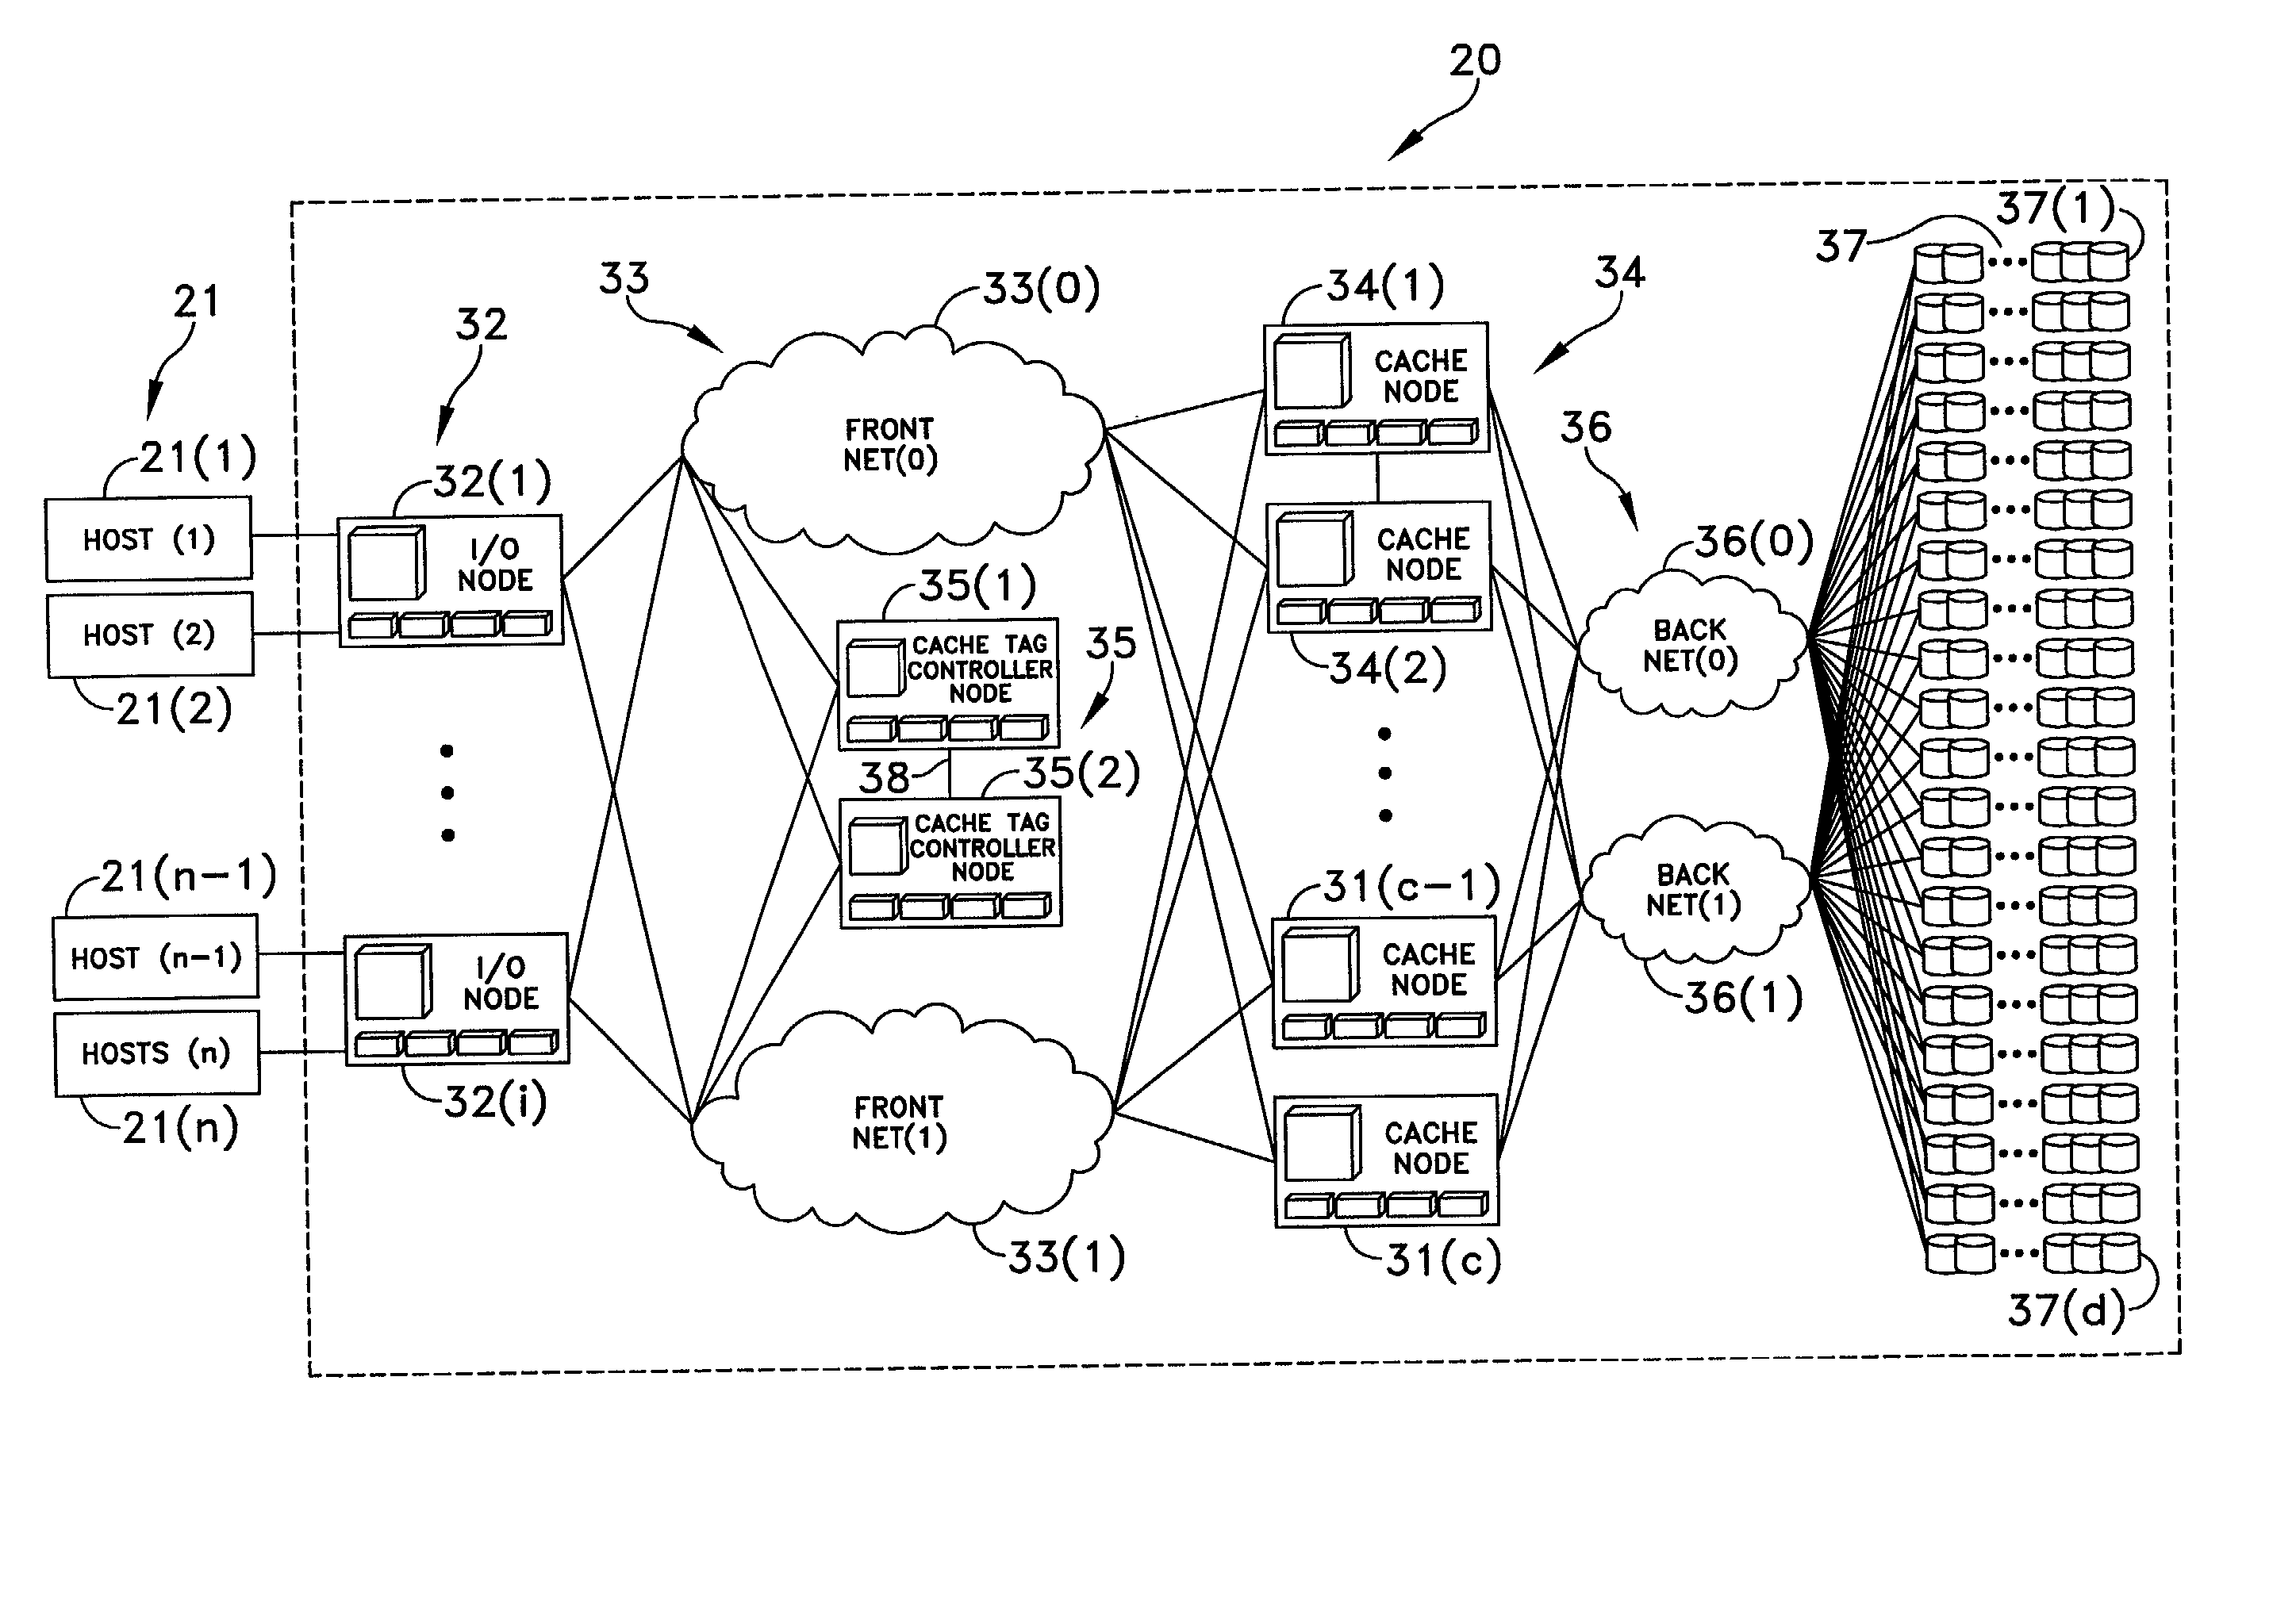 Distributed, scalable data storage facility with cache memory